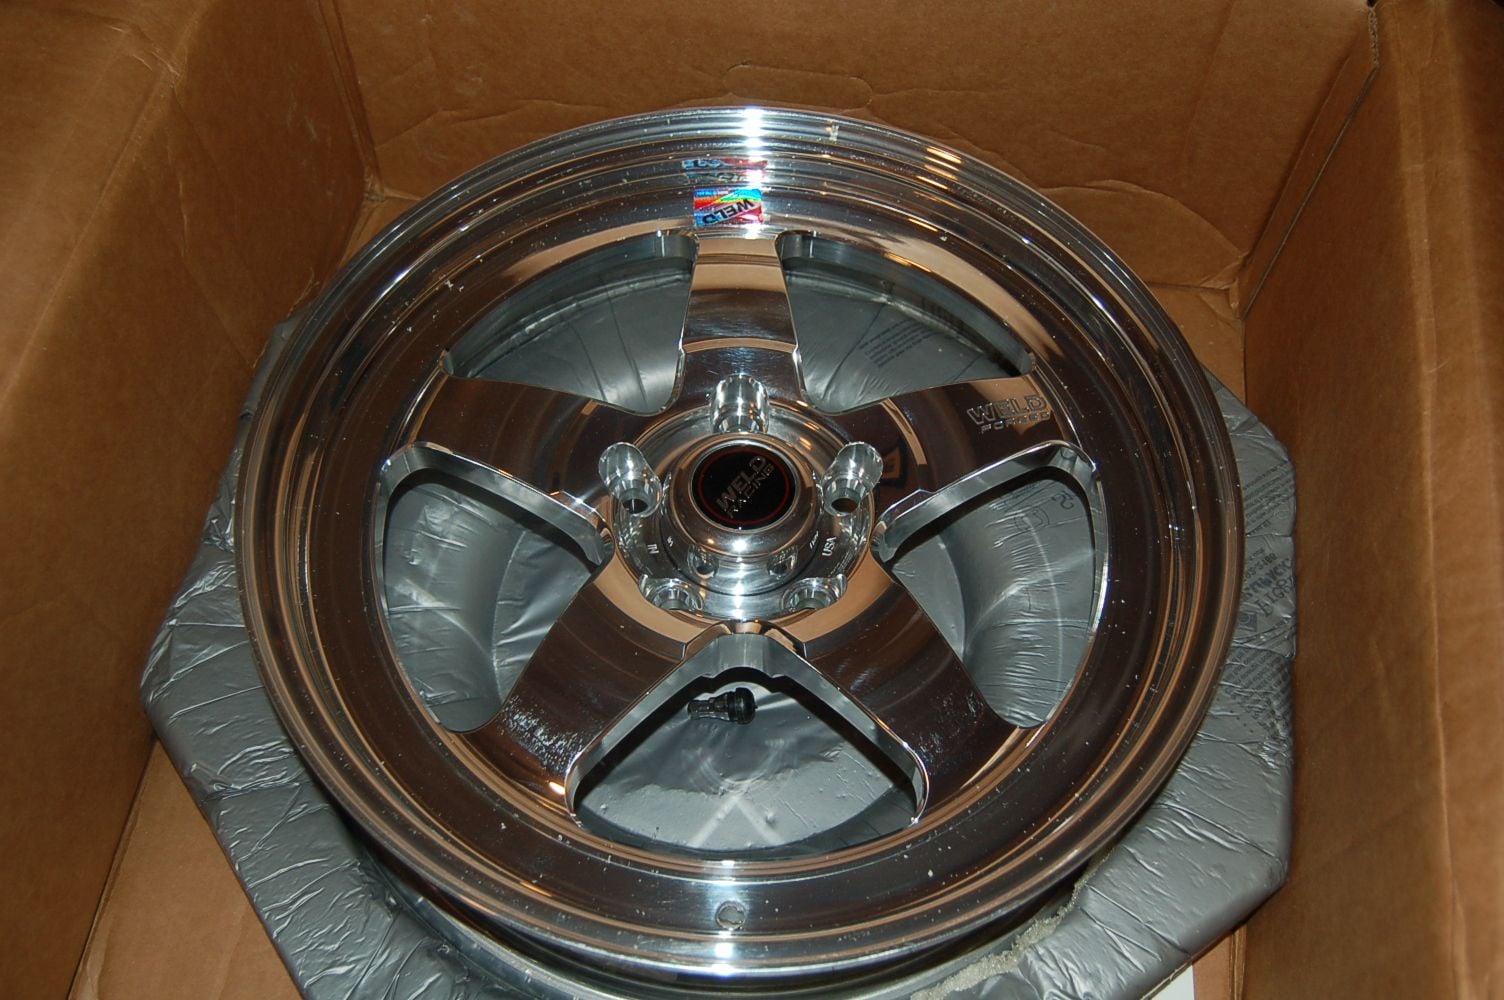  - Pair of 17" x 4.5"  weld  rt-s  s71  polished - 4.75"  bolt pattern  /  medium pad - Carlinville, IL 62626, United States